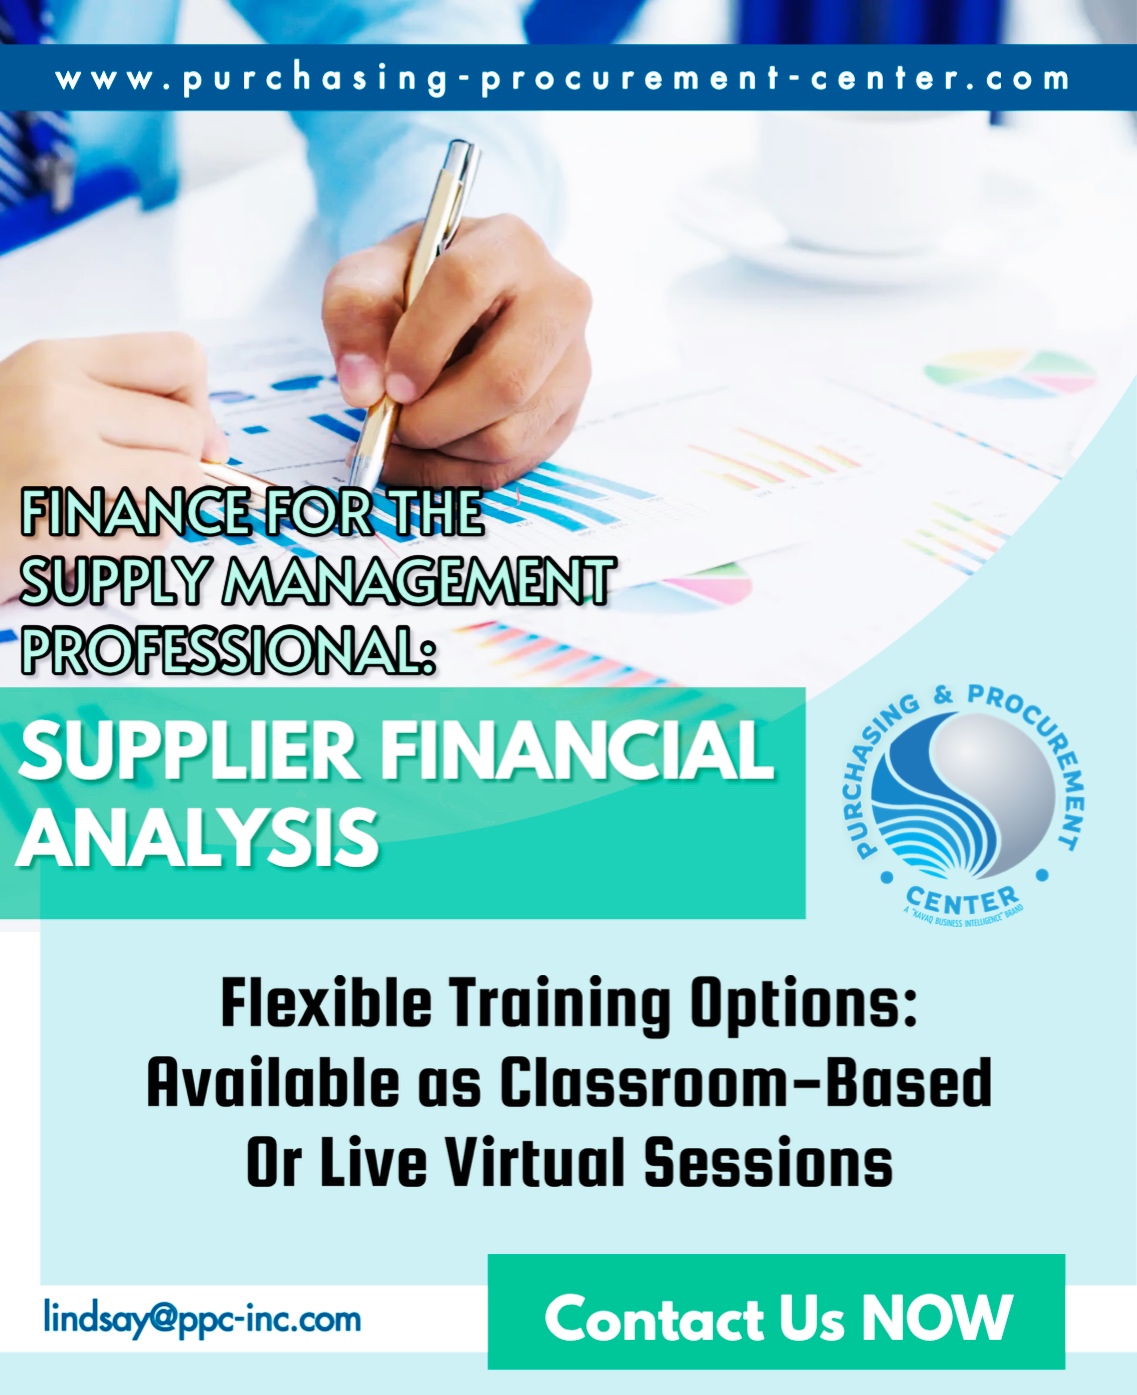 The Supplier Financial Analysis course is a proven set of decision-making tools and financial analysis techniques.